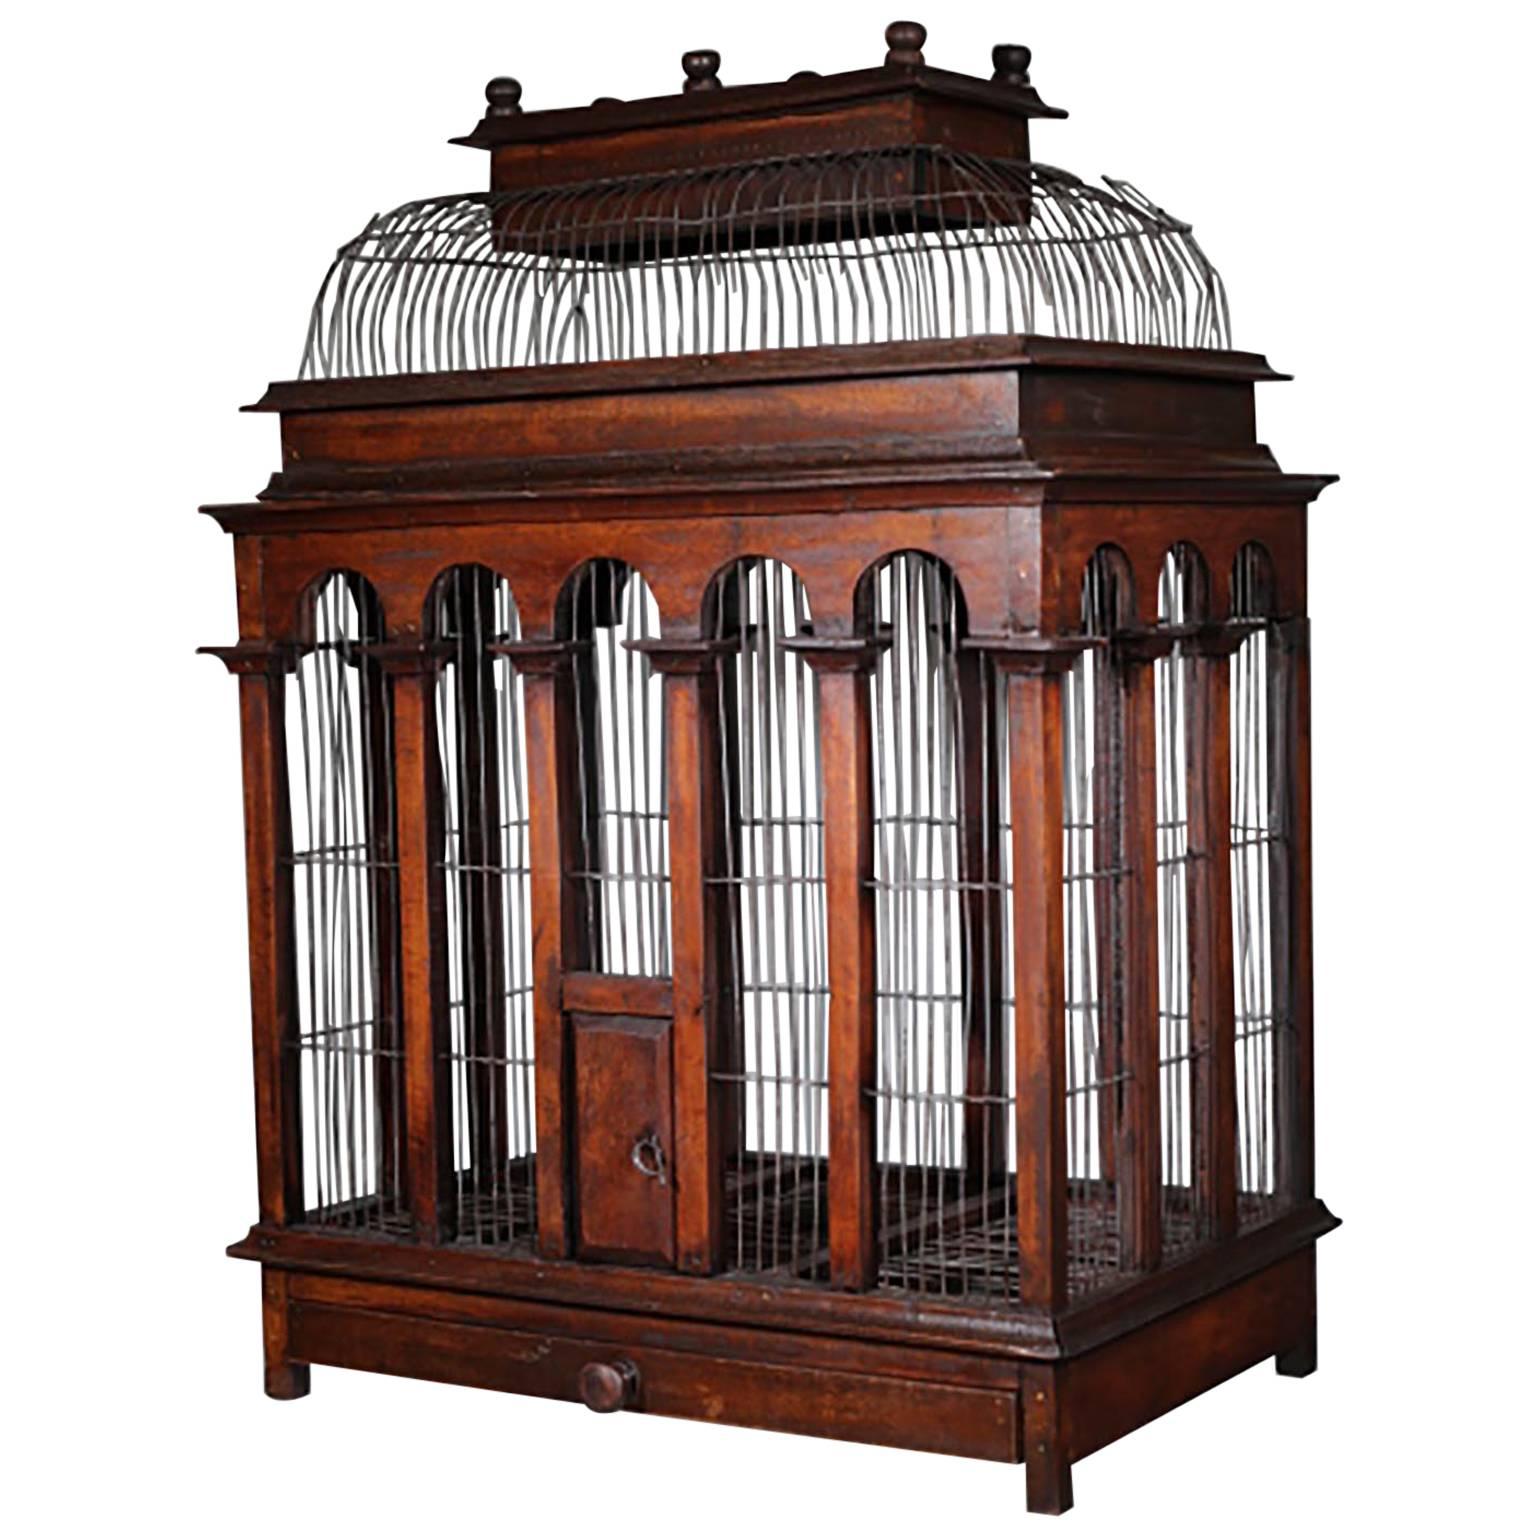 Large Victorian Wooden Birdcage with Wire Dome Top, circa 1800s